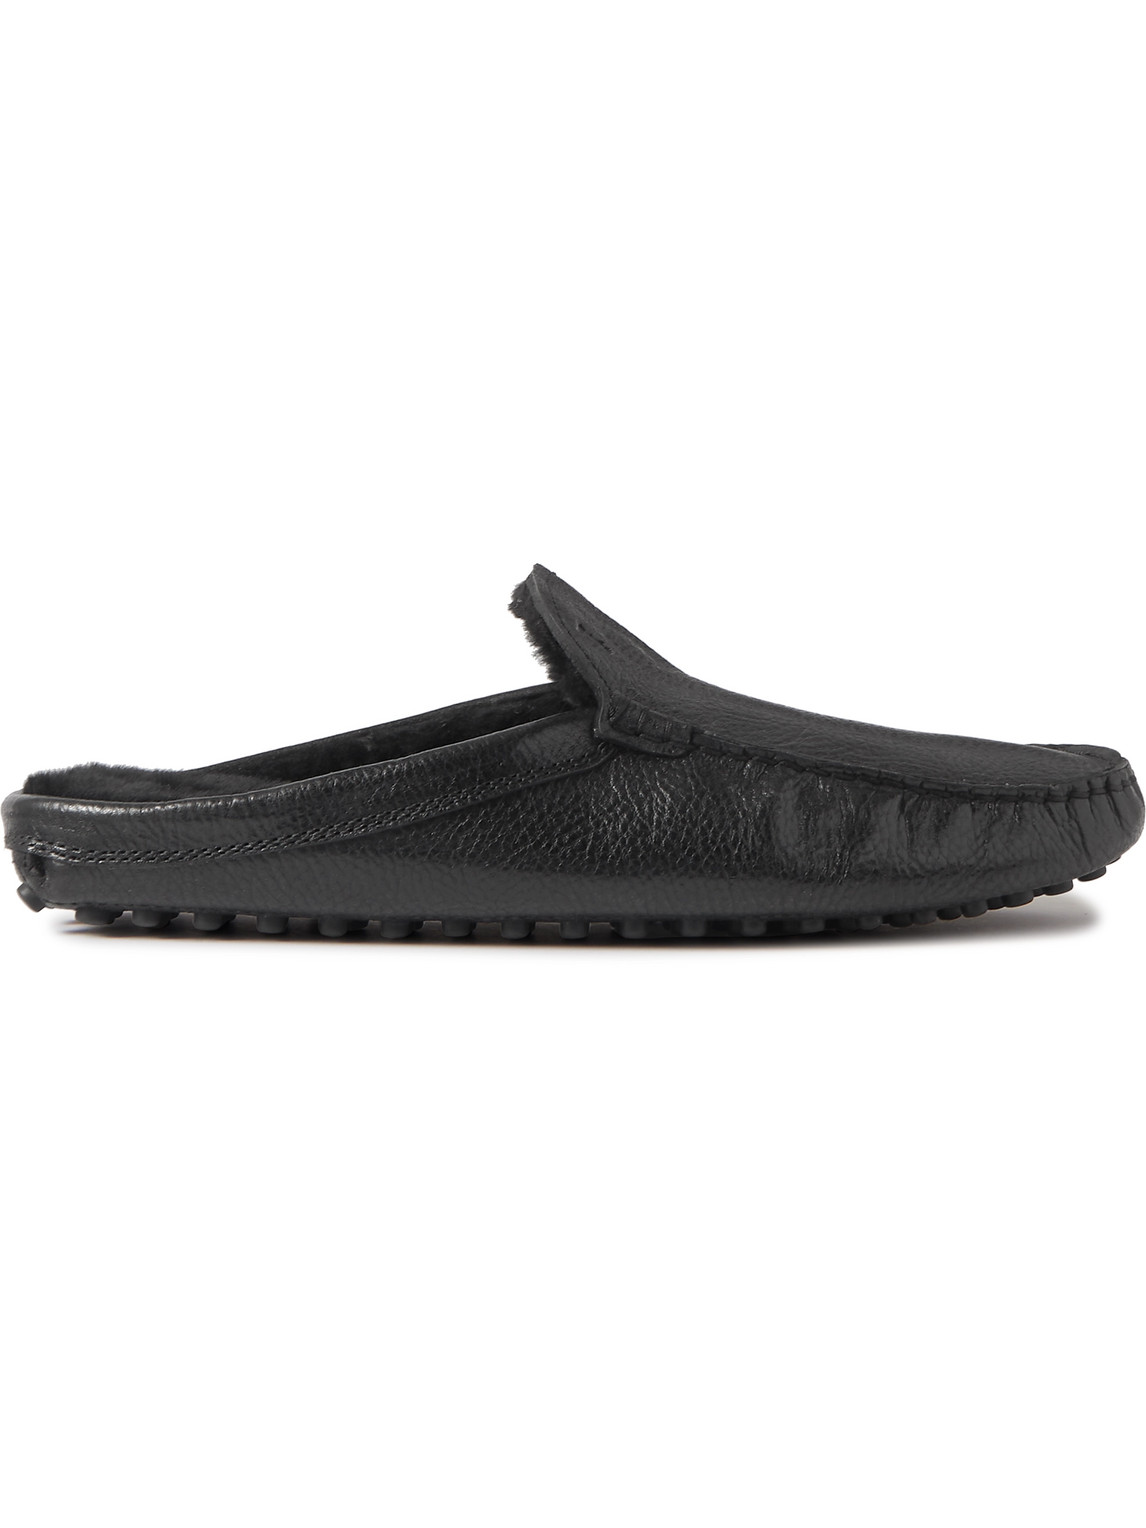 Shearling-Lined Full-Grain Leather Slippers